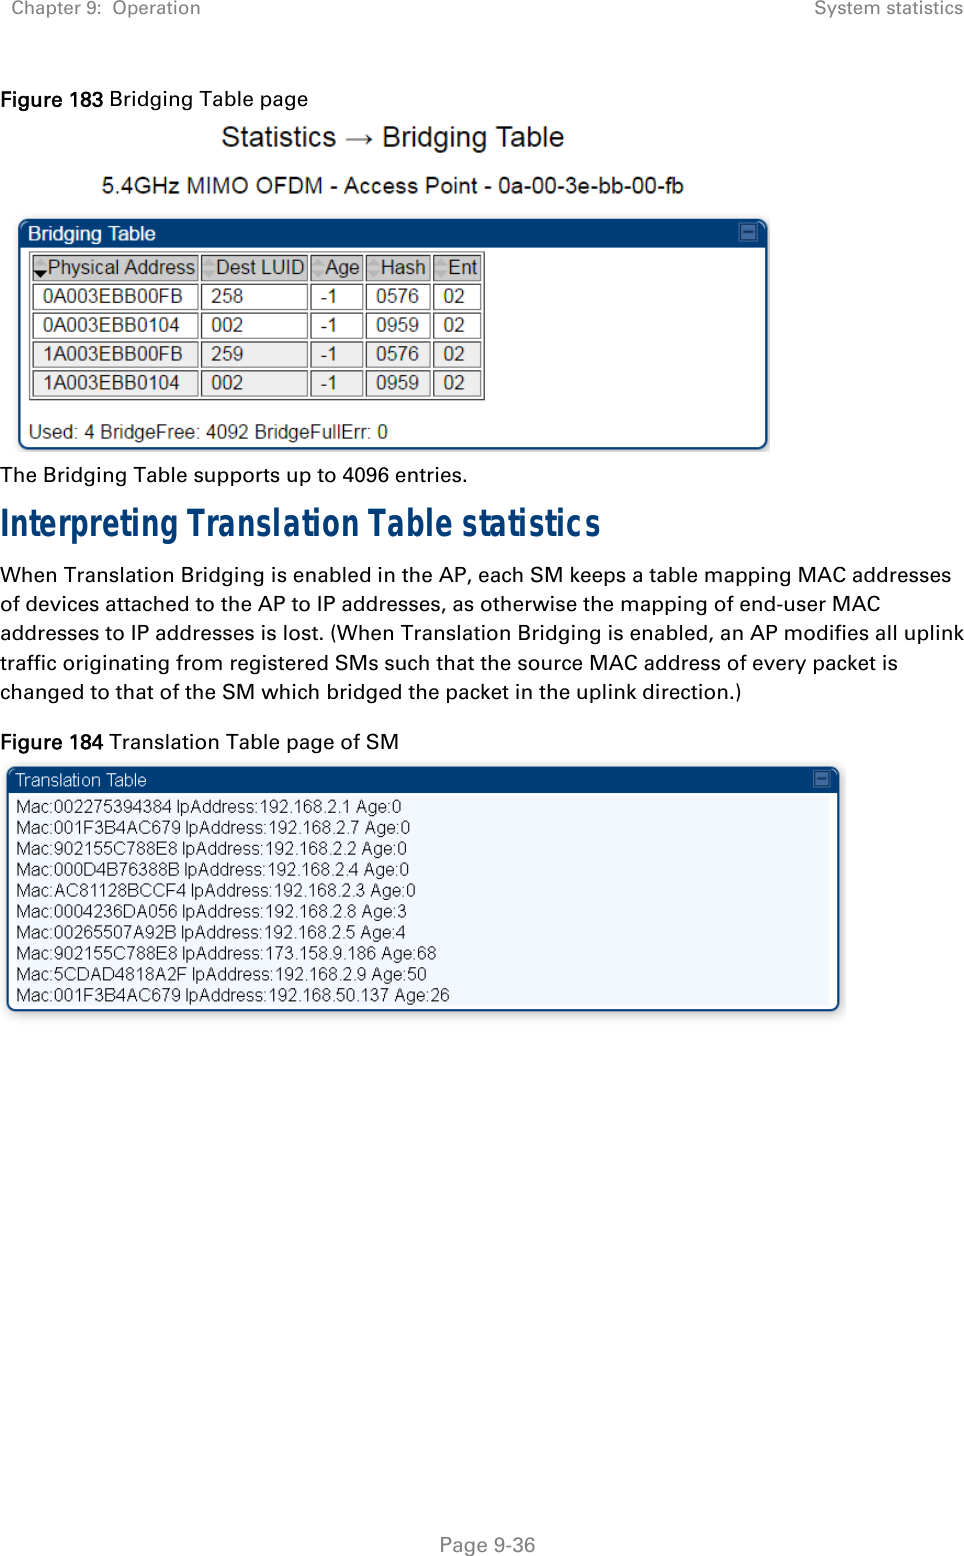 Chapter 9:  Operation  System statistics   Page 9-36 Figure 183 Bridging Table page    The Bridging Table supports up to 4096 entries. Interpreting Translation Table statistics When Translation Bridging is enabled in the AP, each SM keeps a table mapping MAC addresses of devices attached to the AP to IP addresses, as otherwise the mapping of end-user MAC addresses to IP addresses is lost. (When Translation Bridging is enabled, an AP modifies all uplink traffic originating from registered SMs such that the source MAC address of every packet is changed to that of the SM which bridged the packet in the uplink direction.) Figure 184 Translation Table page of SM  